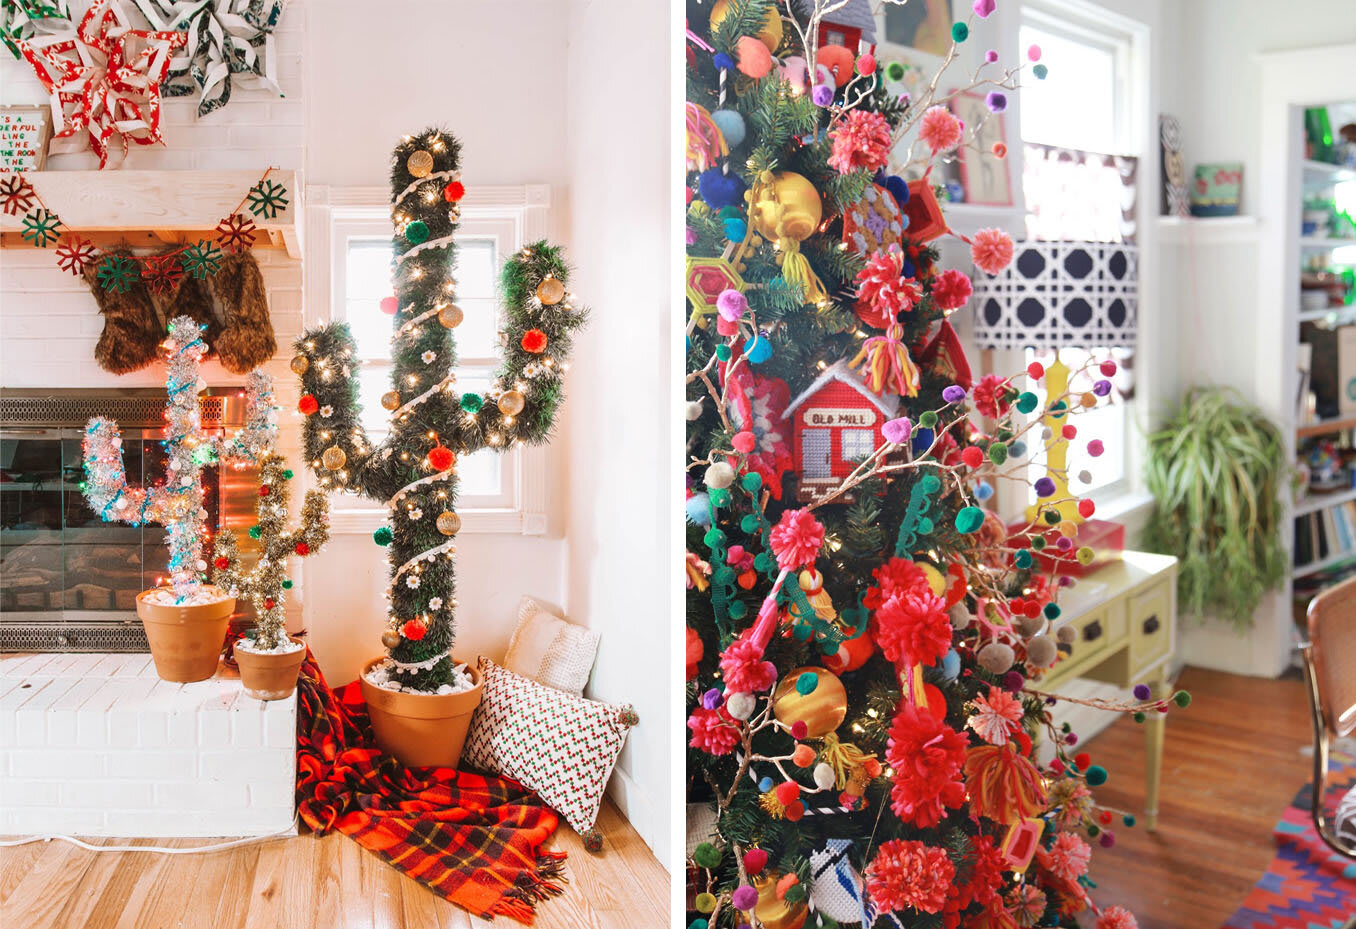 5 Unique Christmas Tree Styles to Consider This Holiday